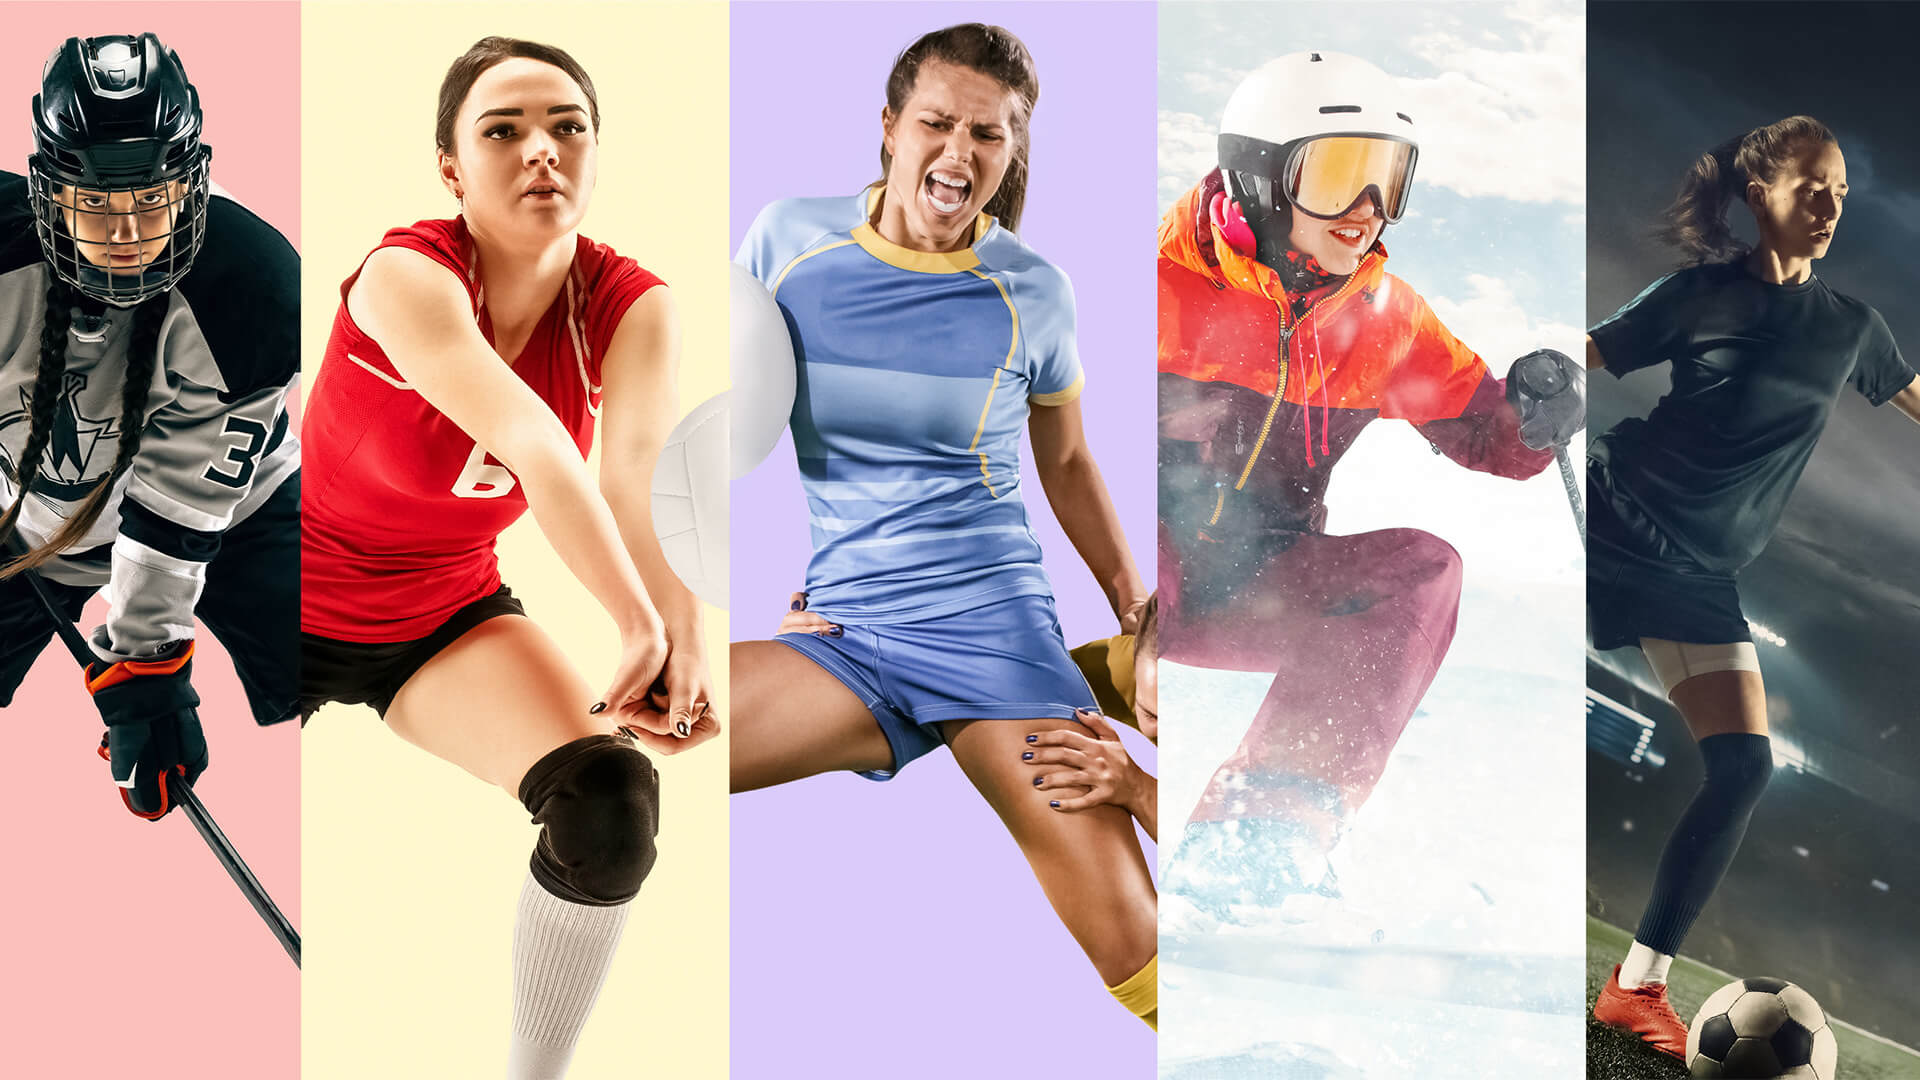 Why do girls need athletic role models? - The Sport Information